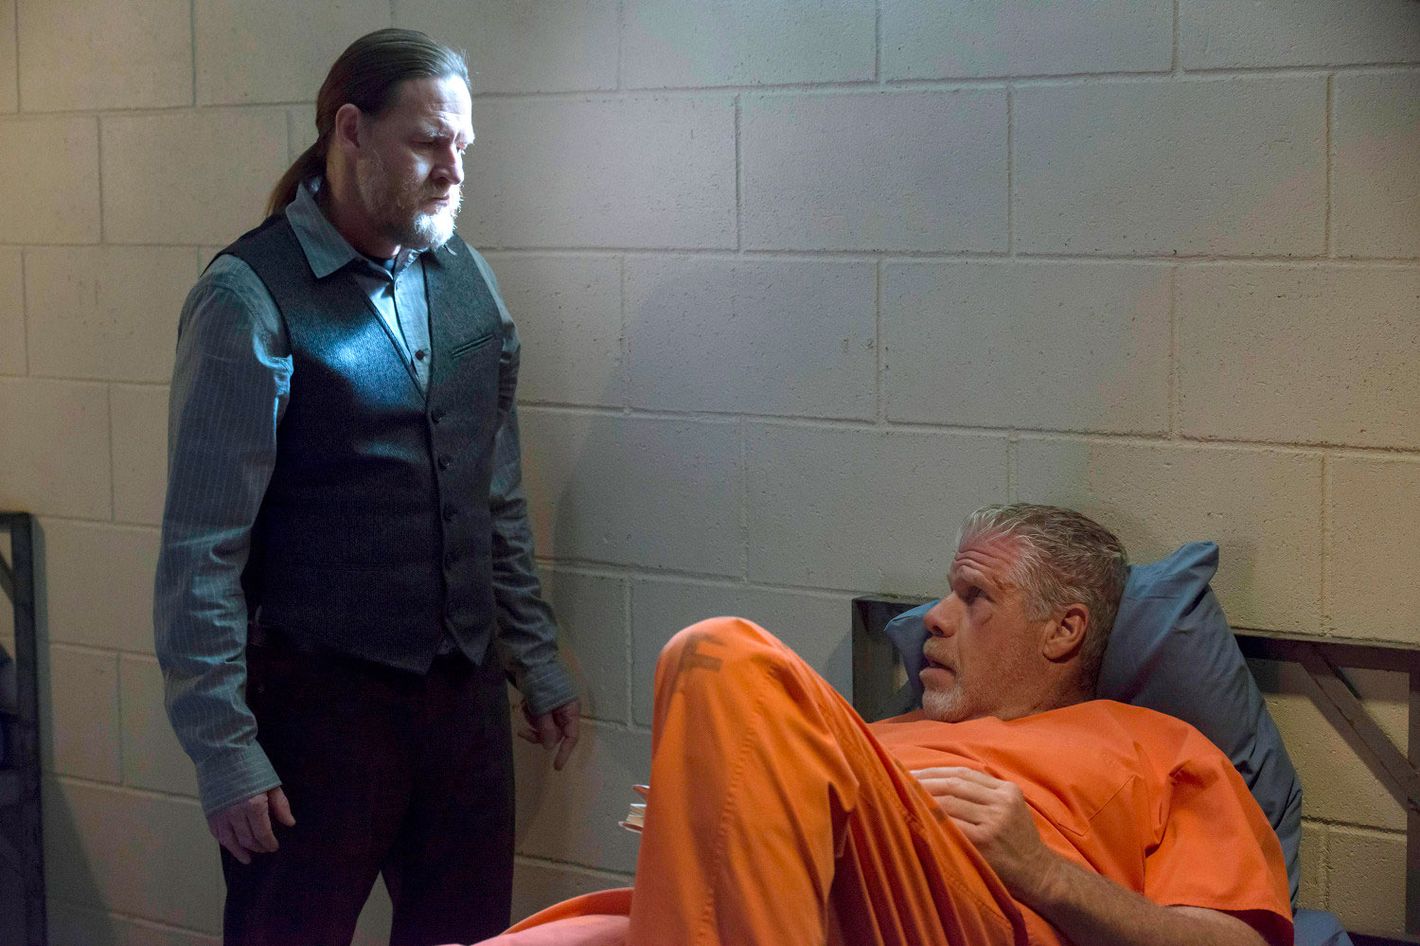 Xxx Hot Forced Cheating Rapes Videos - Sons of Anarchy Recap: An Unexpected Shooting